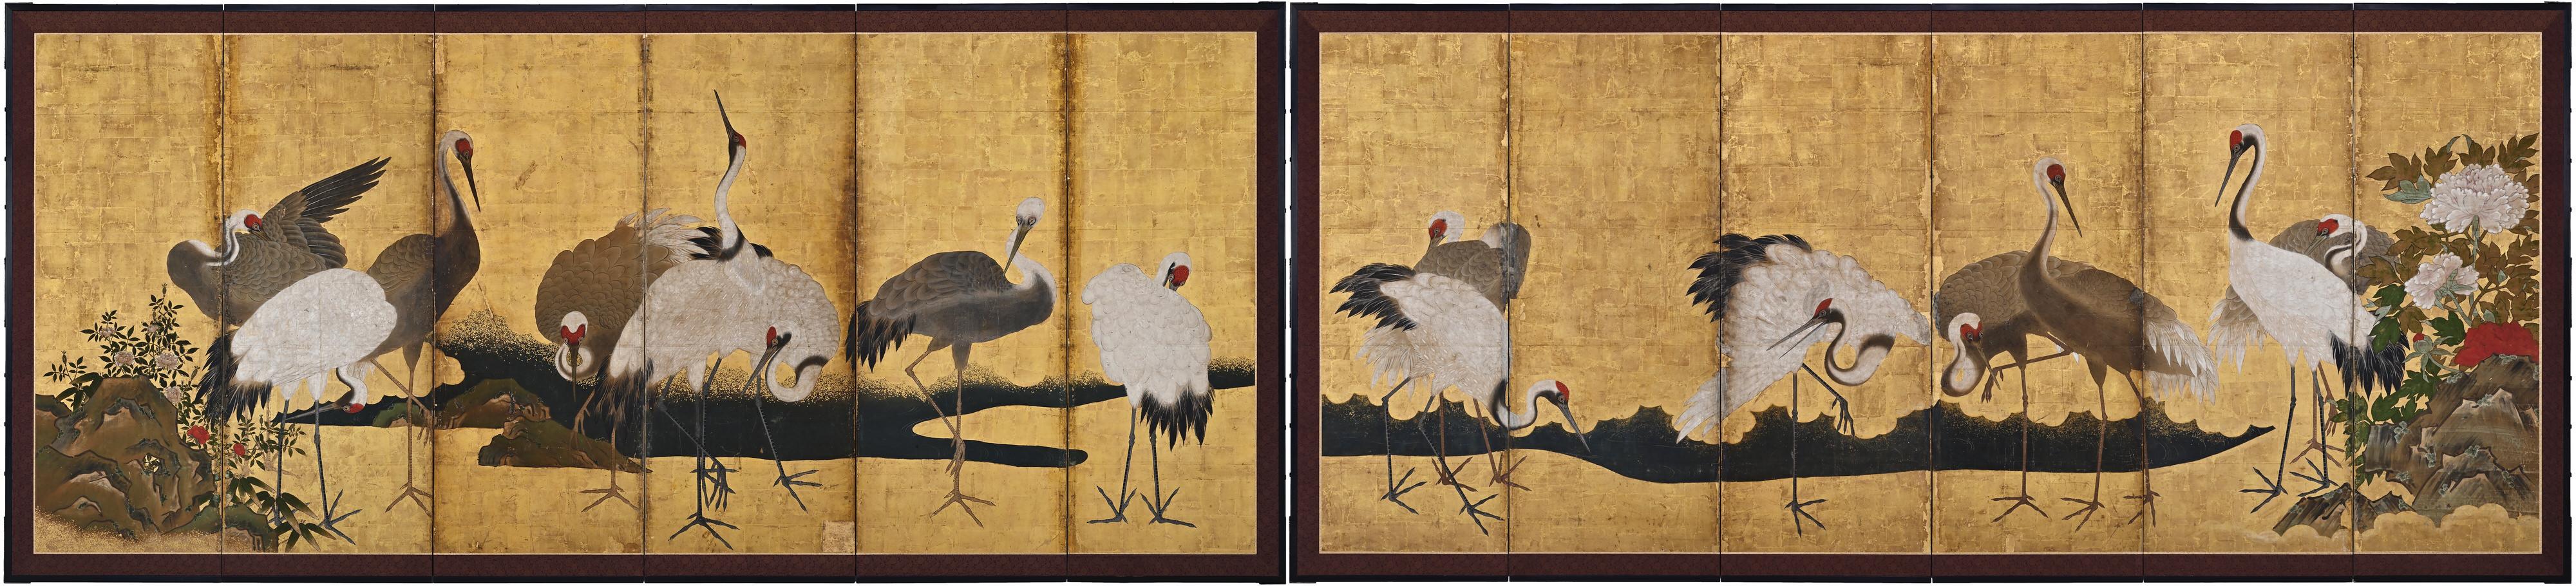 Cranes

Anonymous, Kano School.

Edo period, second half of the 17th century.

Pair of six-panel screens. Ink, pigment gofun and gold leaf on paper.

Dimensions: 
Each: H. 171 cm x W. 376 cm (67’’ x 148’’)

This bold and innovative